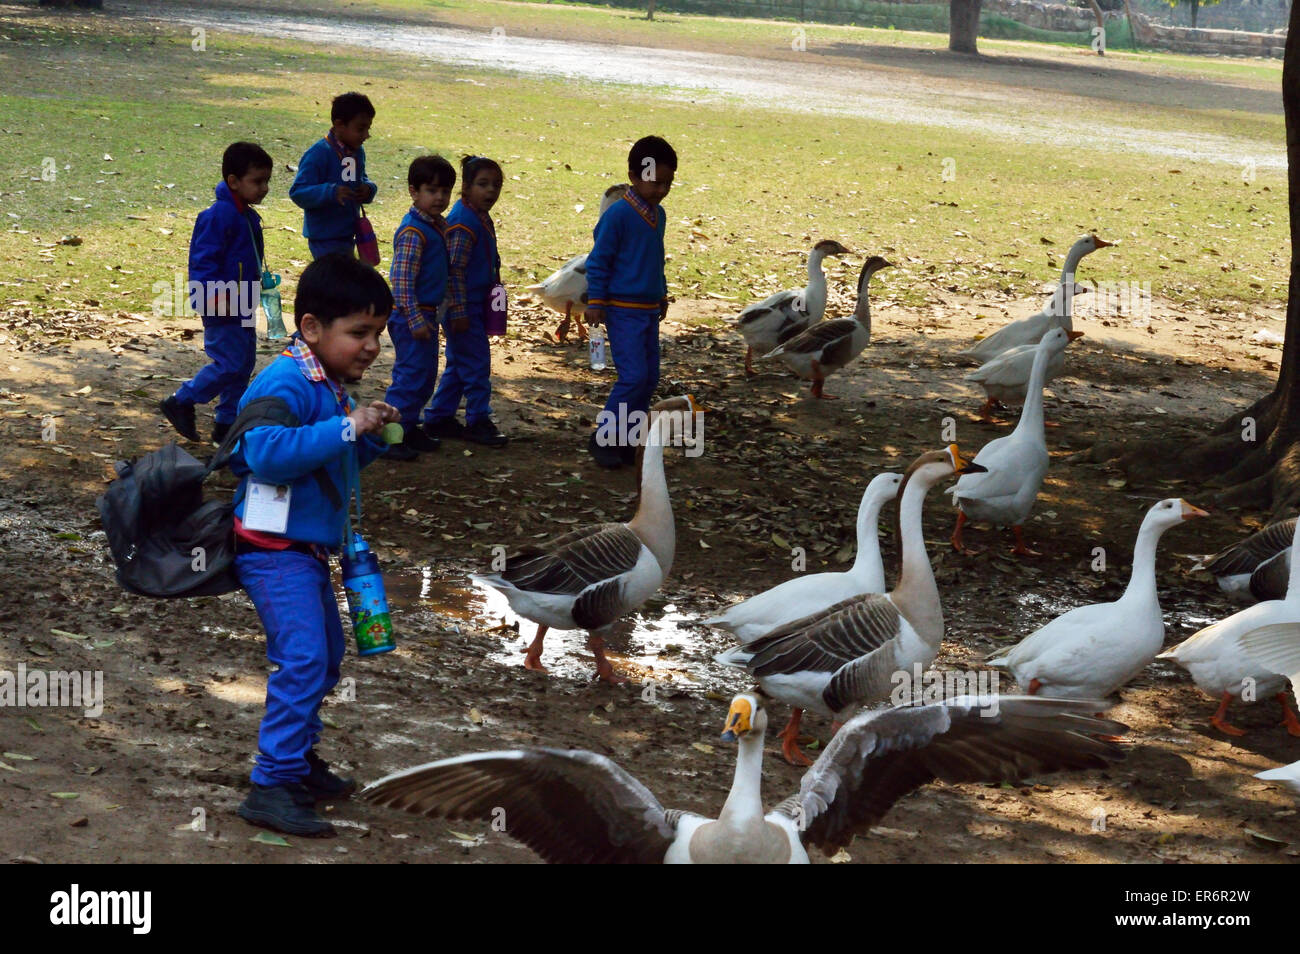 School Kids on an outing chasing ducks at Lodhi Gardens Delhi India February 2015 Stock Photo